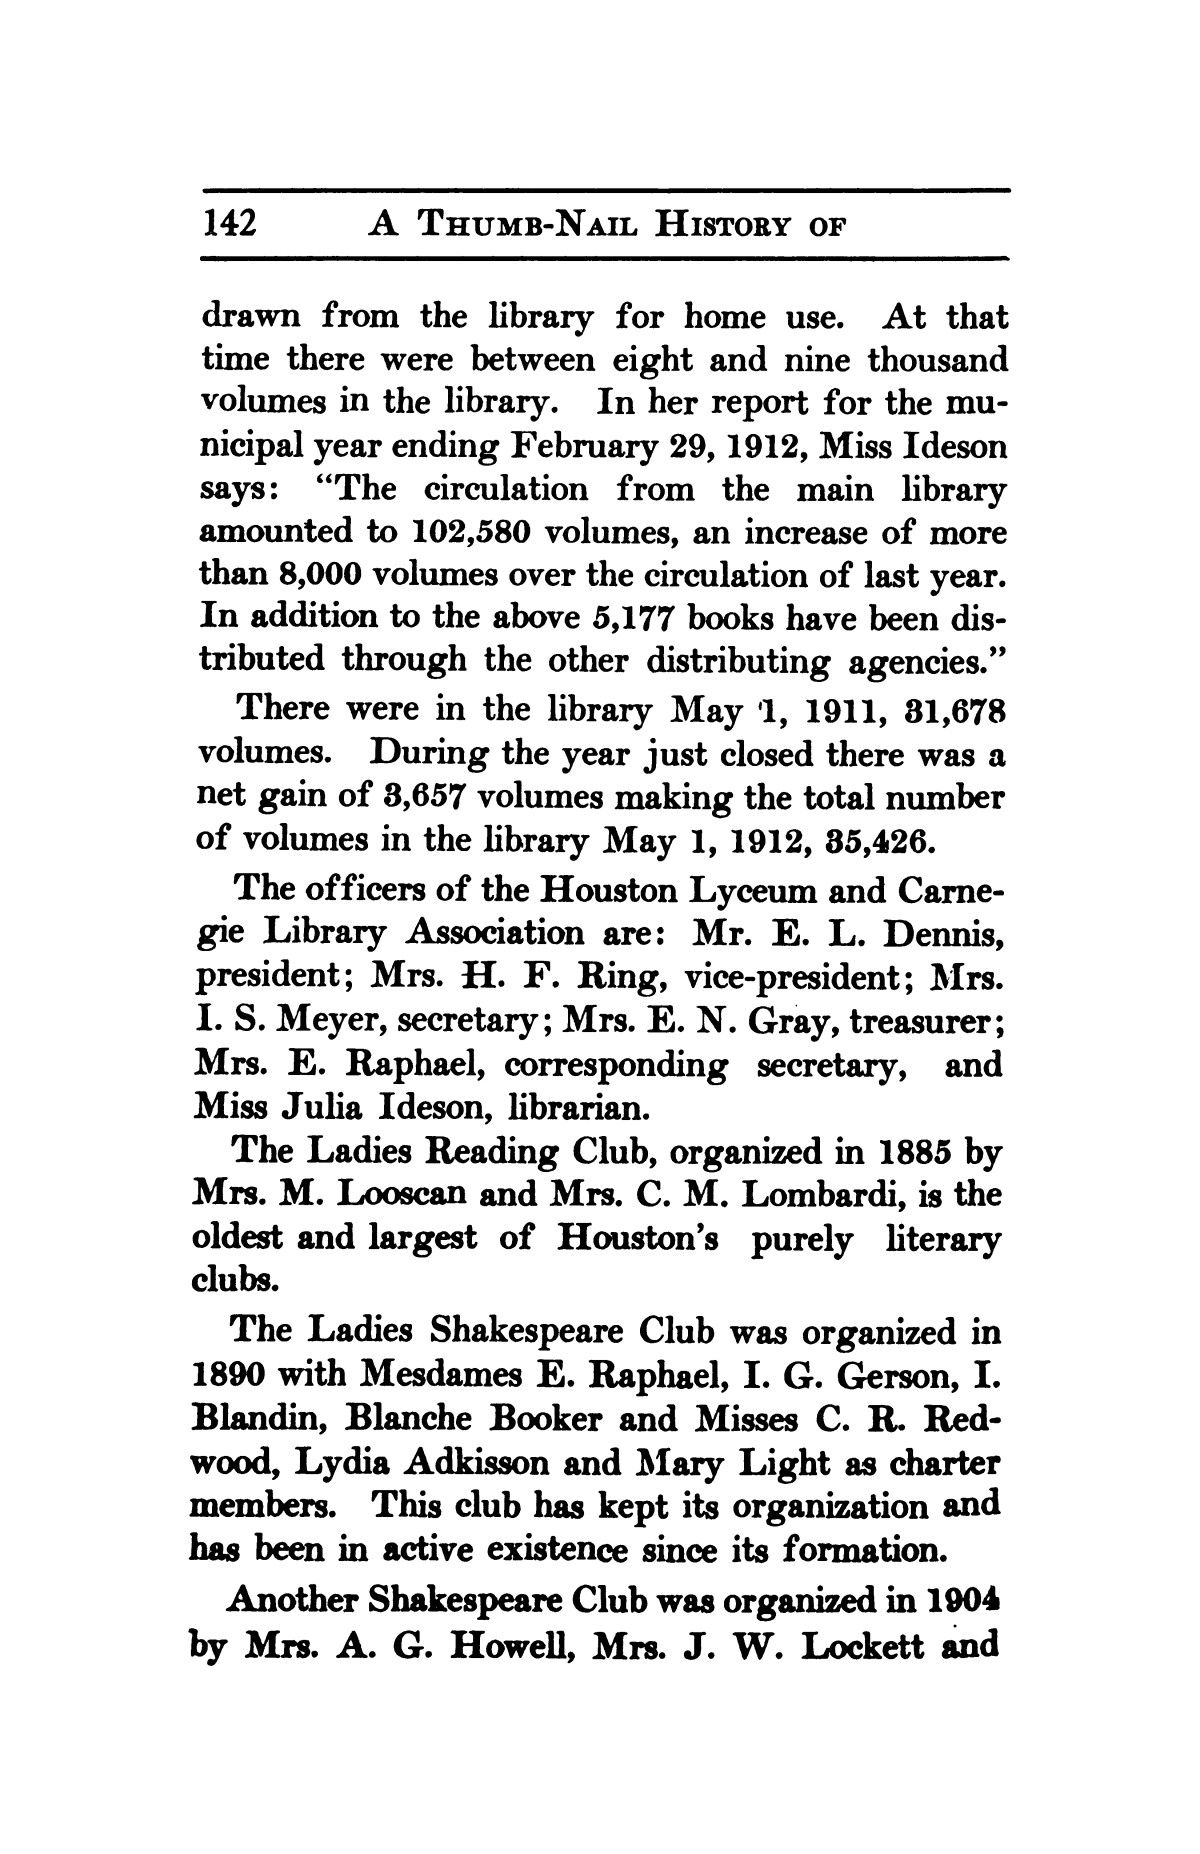 A thumb-nail history of the city of Houston, Texas, from its founding in 1836 to the year 1912
                                                
                                                    142
                                                